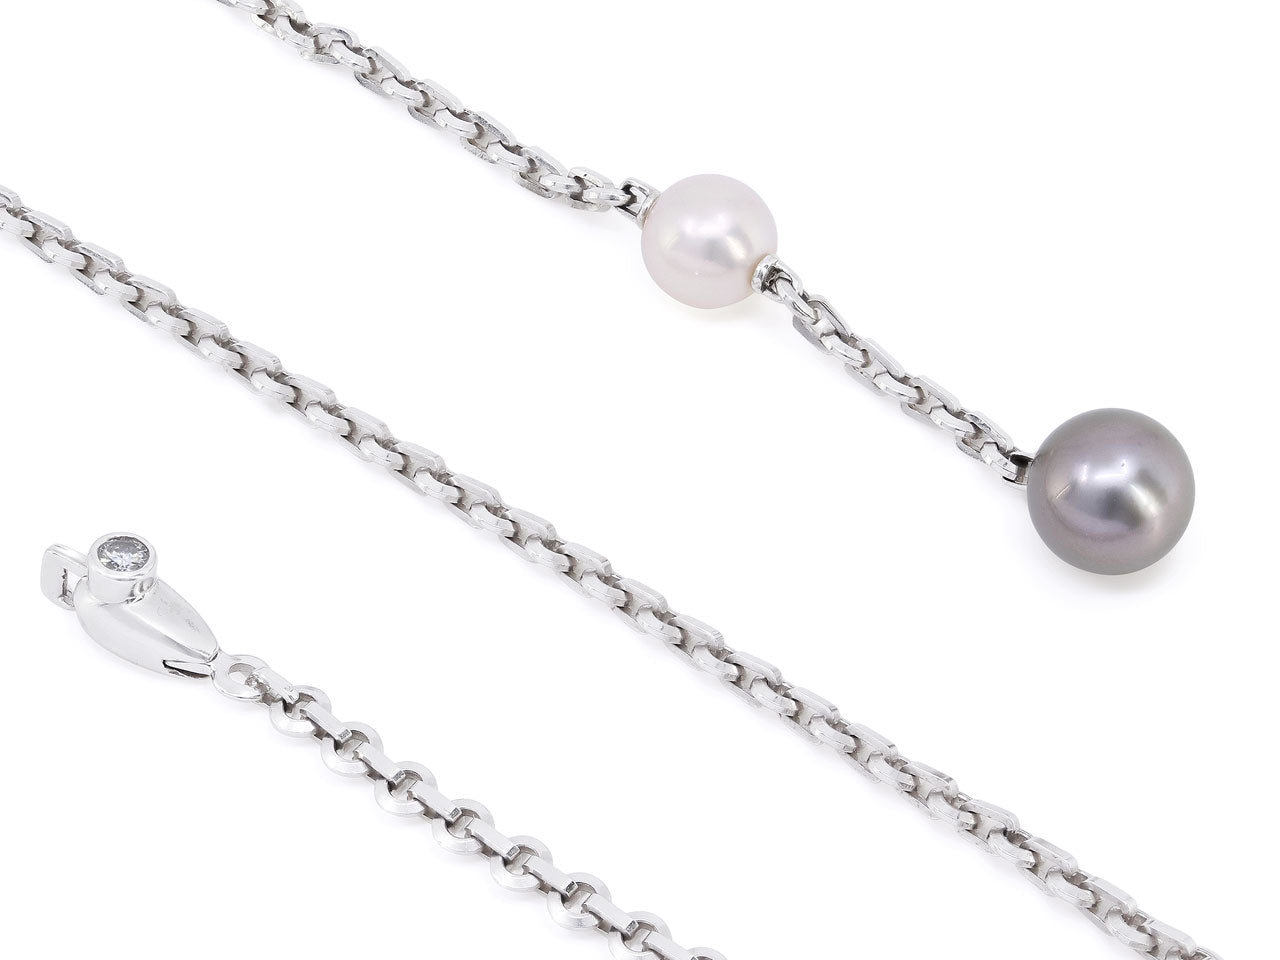 Cartier South Sea and Tahitian Pearl Lariat Necklace in 18K White Gold